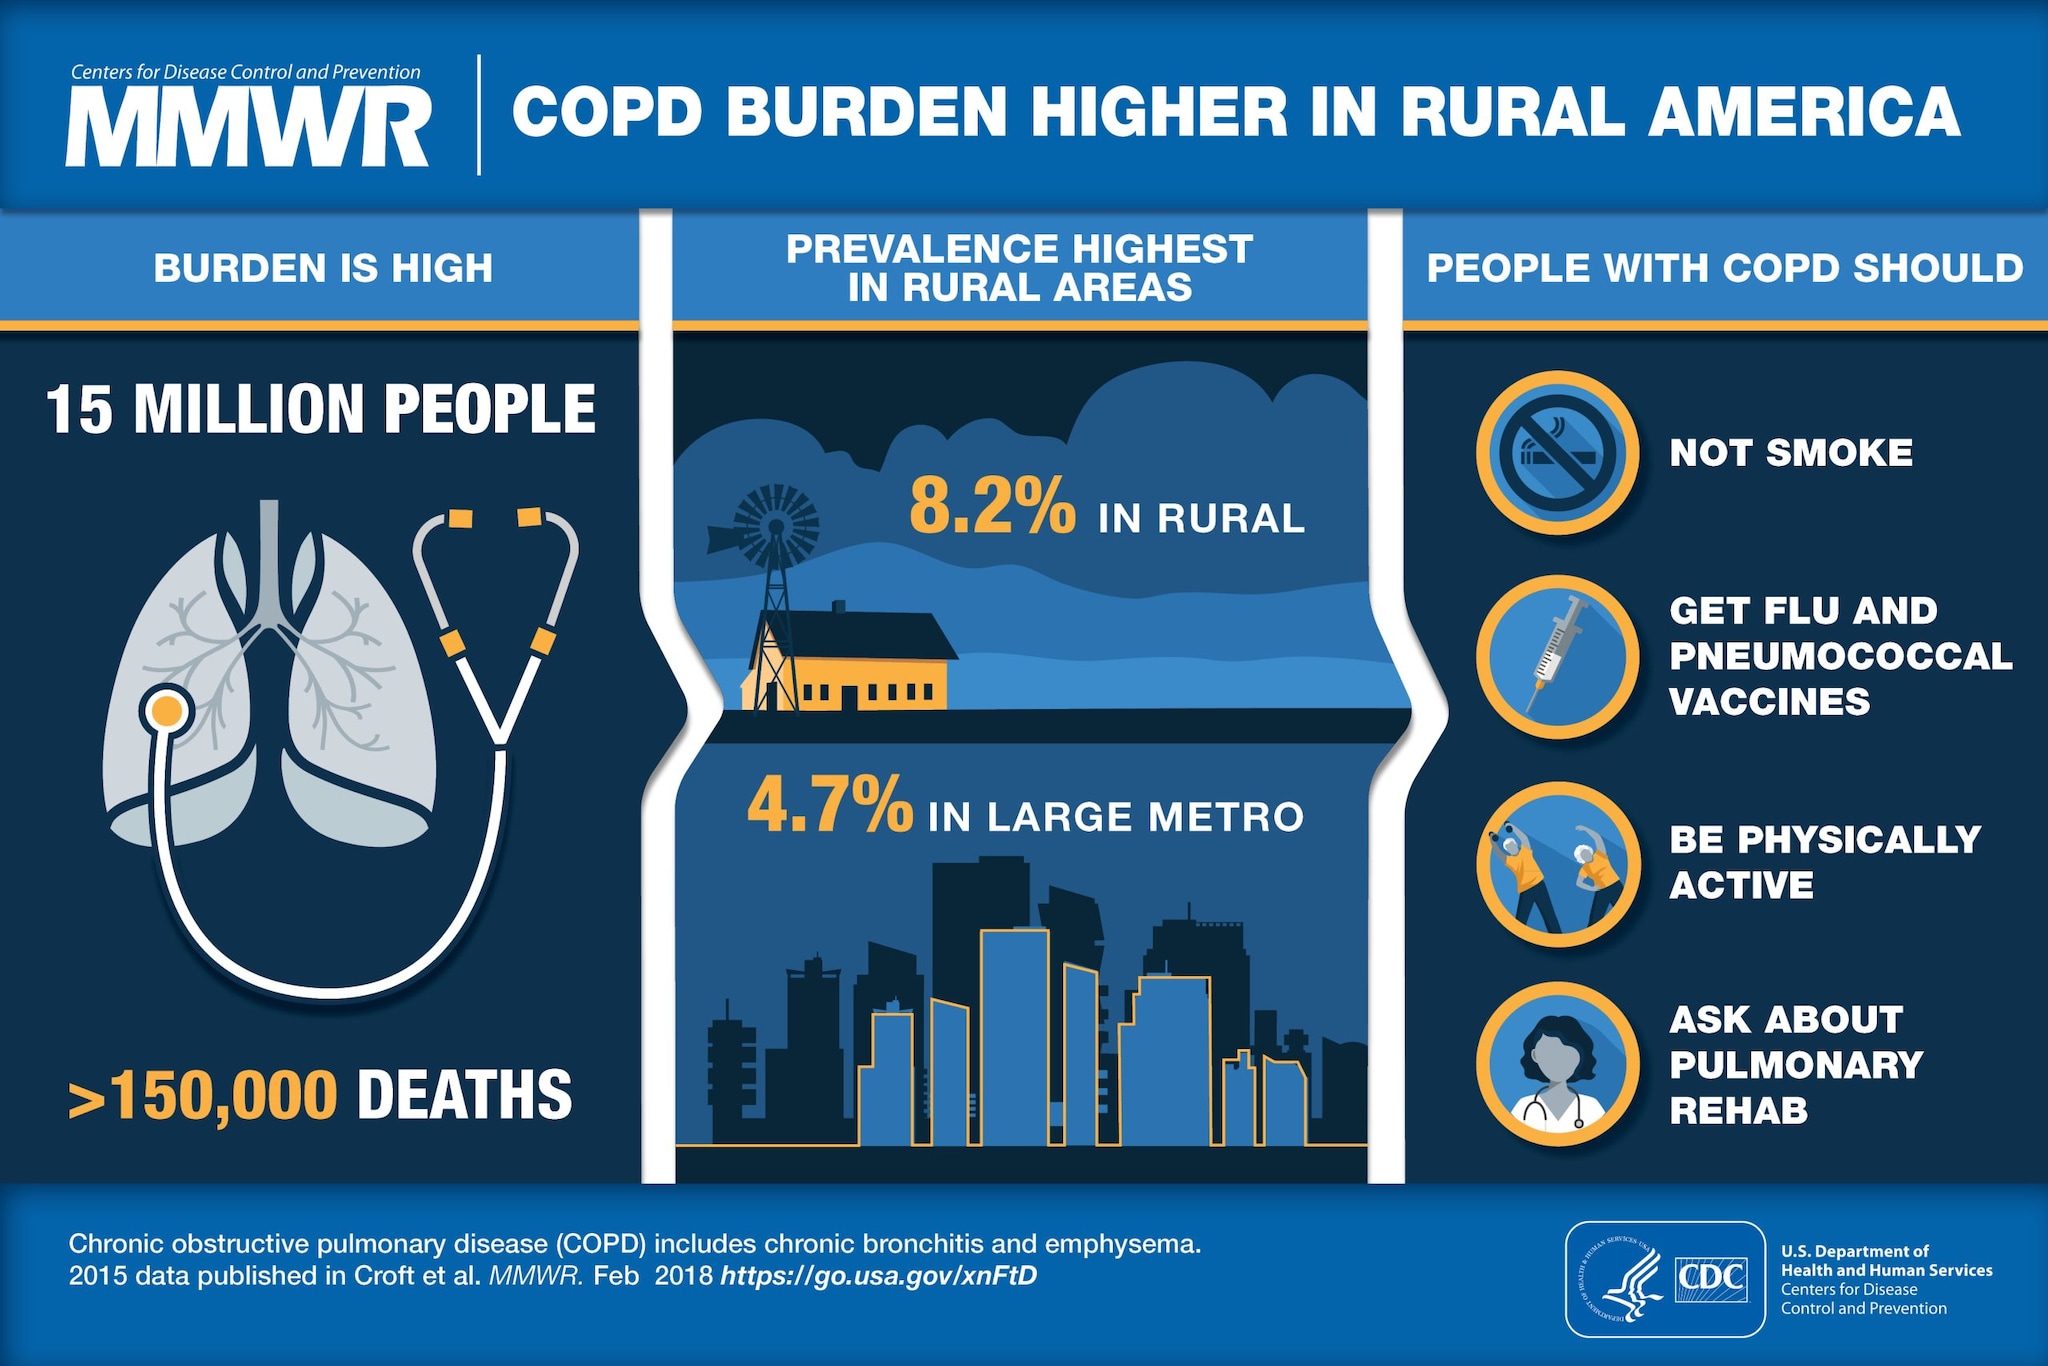 An infographic titled "COPD Burden Higher in Rural America." The content is divided into three columns. Column 1 is titled "Burden is High" and has text stating "15 million people" and ">150,000 deaths". Columns 2 is titled "Prevalence Highest in Rural Areas" and has text stating "8.2% in Rural" and "4.7% in large metro." Column 3 is titled "People with COPD should" and has text stating "not smoke, get flu and pneumococcal vaccines, be physically active, ask about pulmonary rehab".